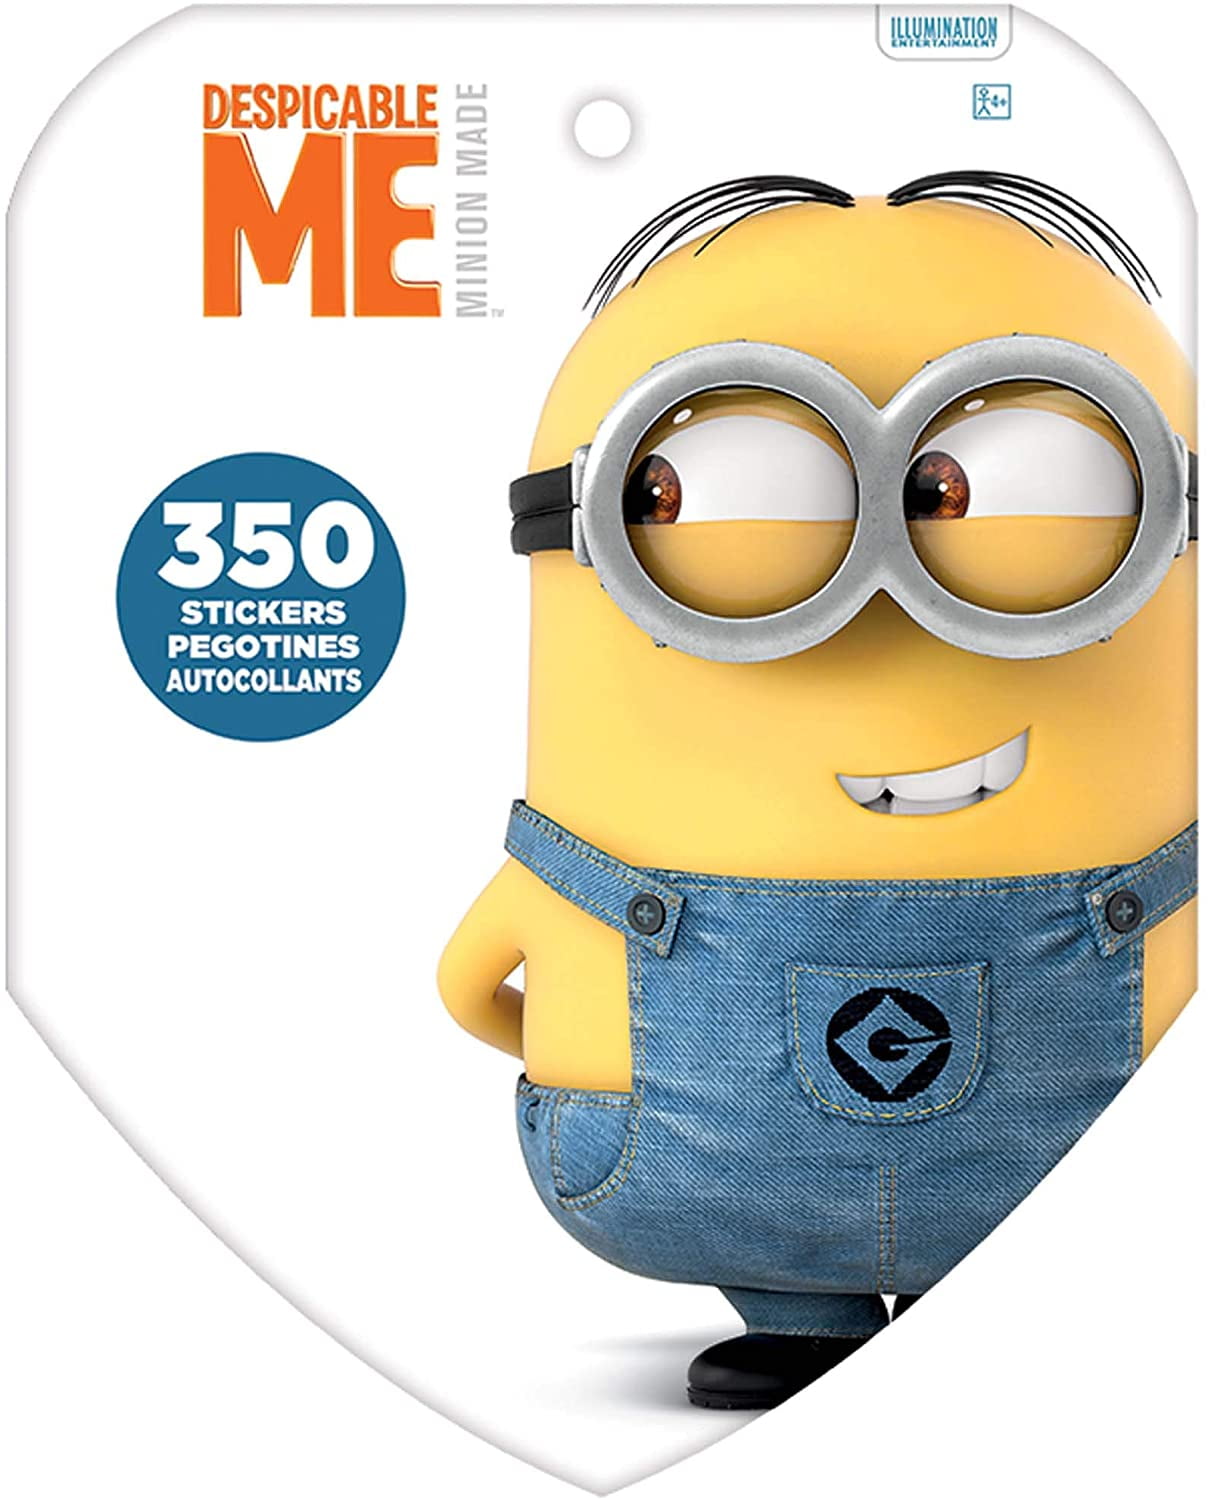 40 Personalised Childrens Party Stickers Minions Despicable Me 2 gift bags